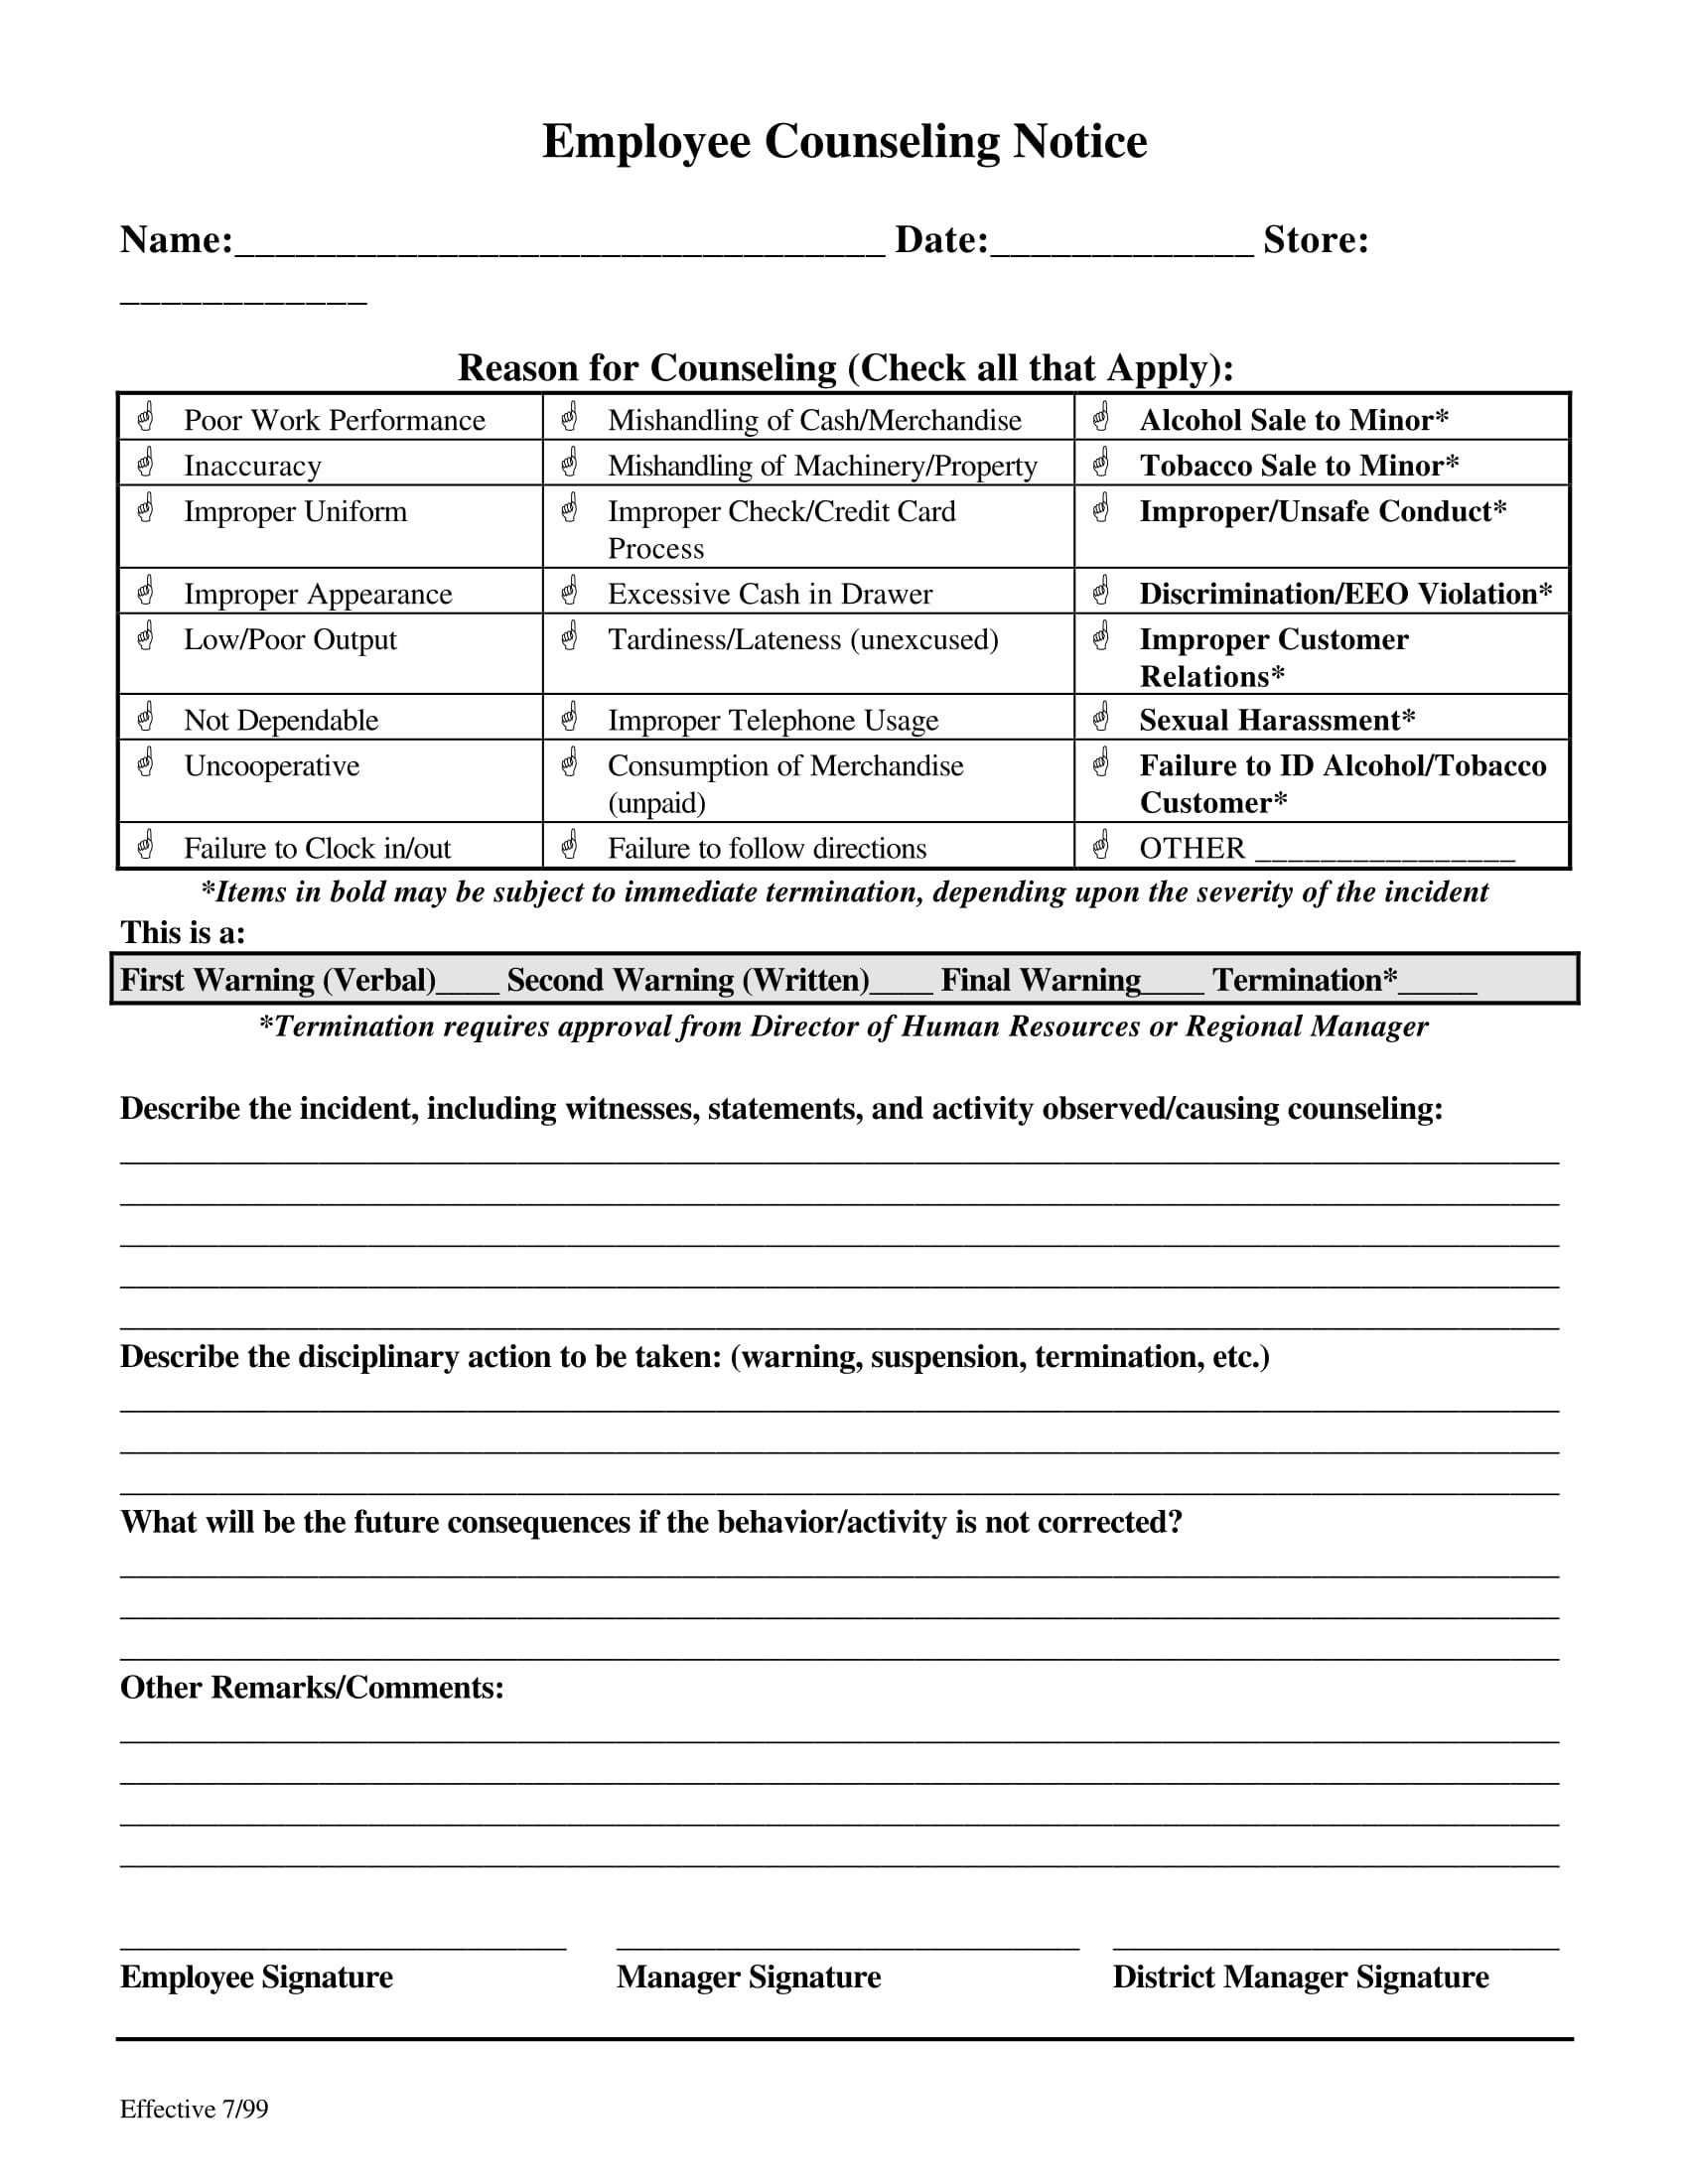 employee counseling notice form 1